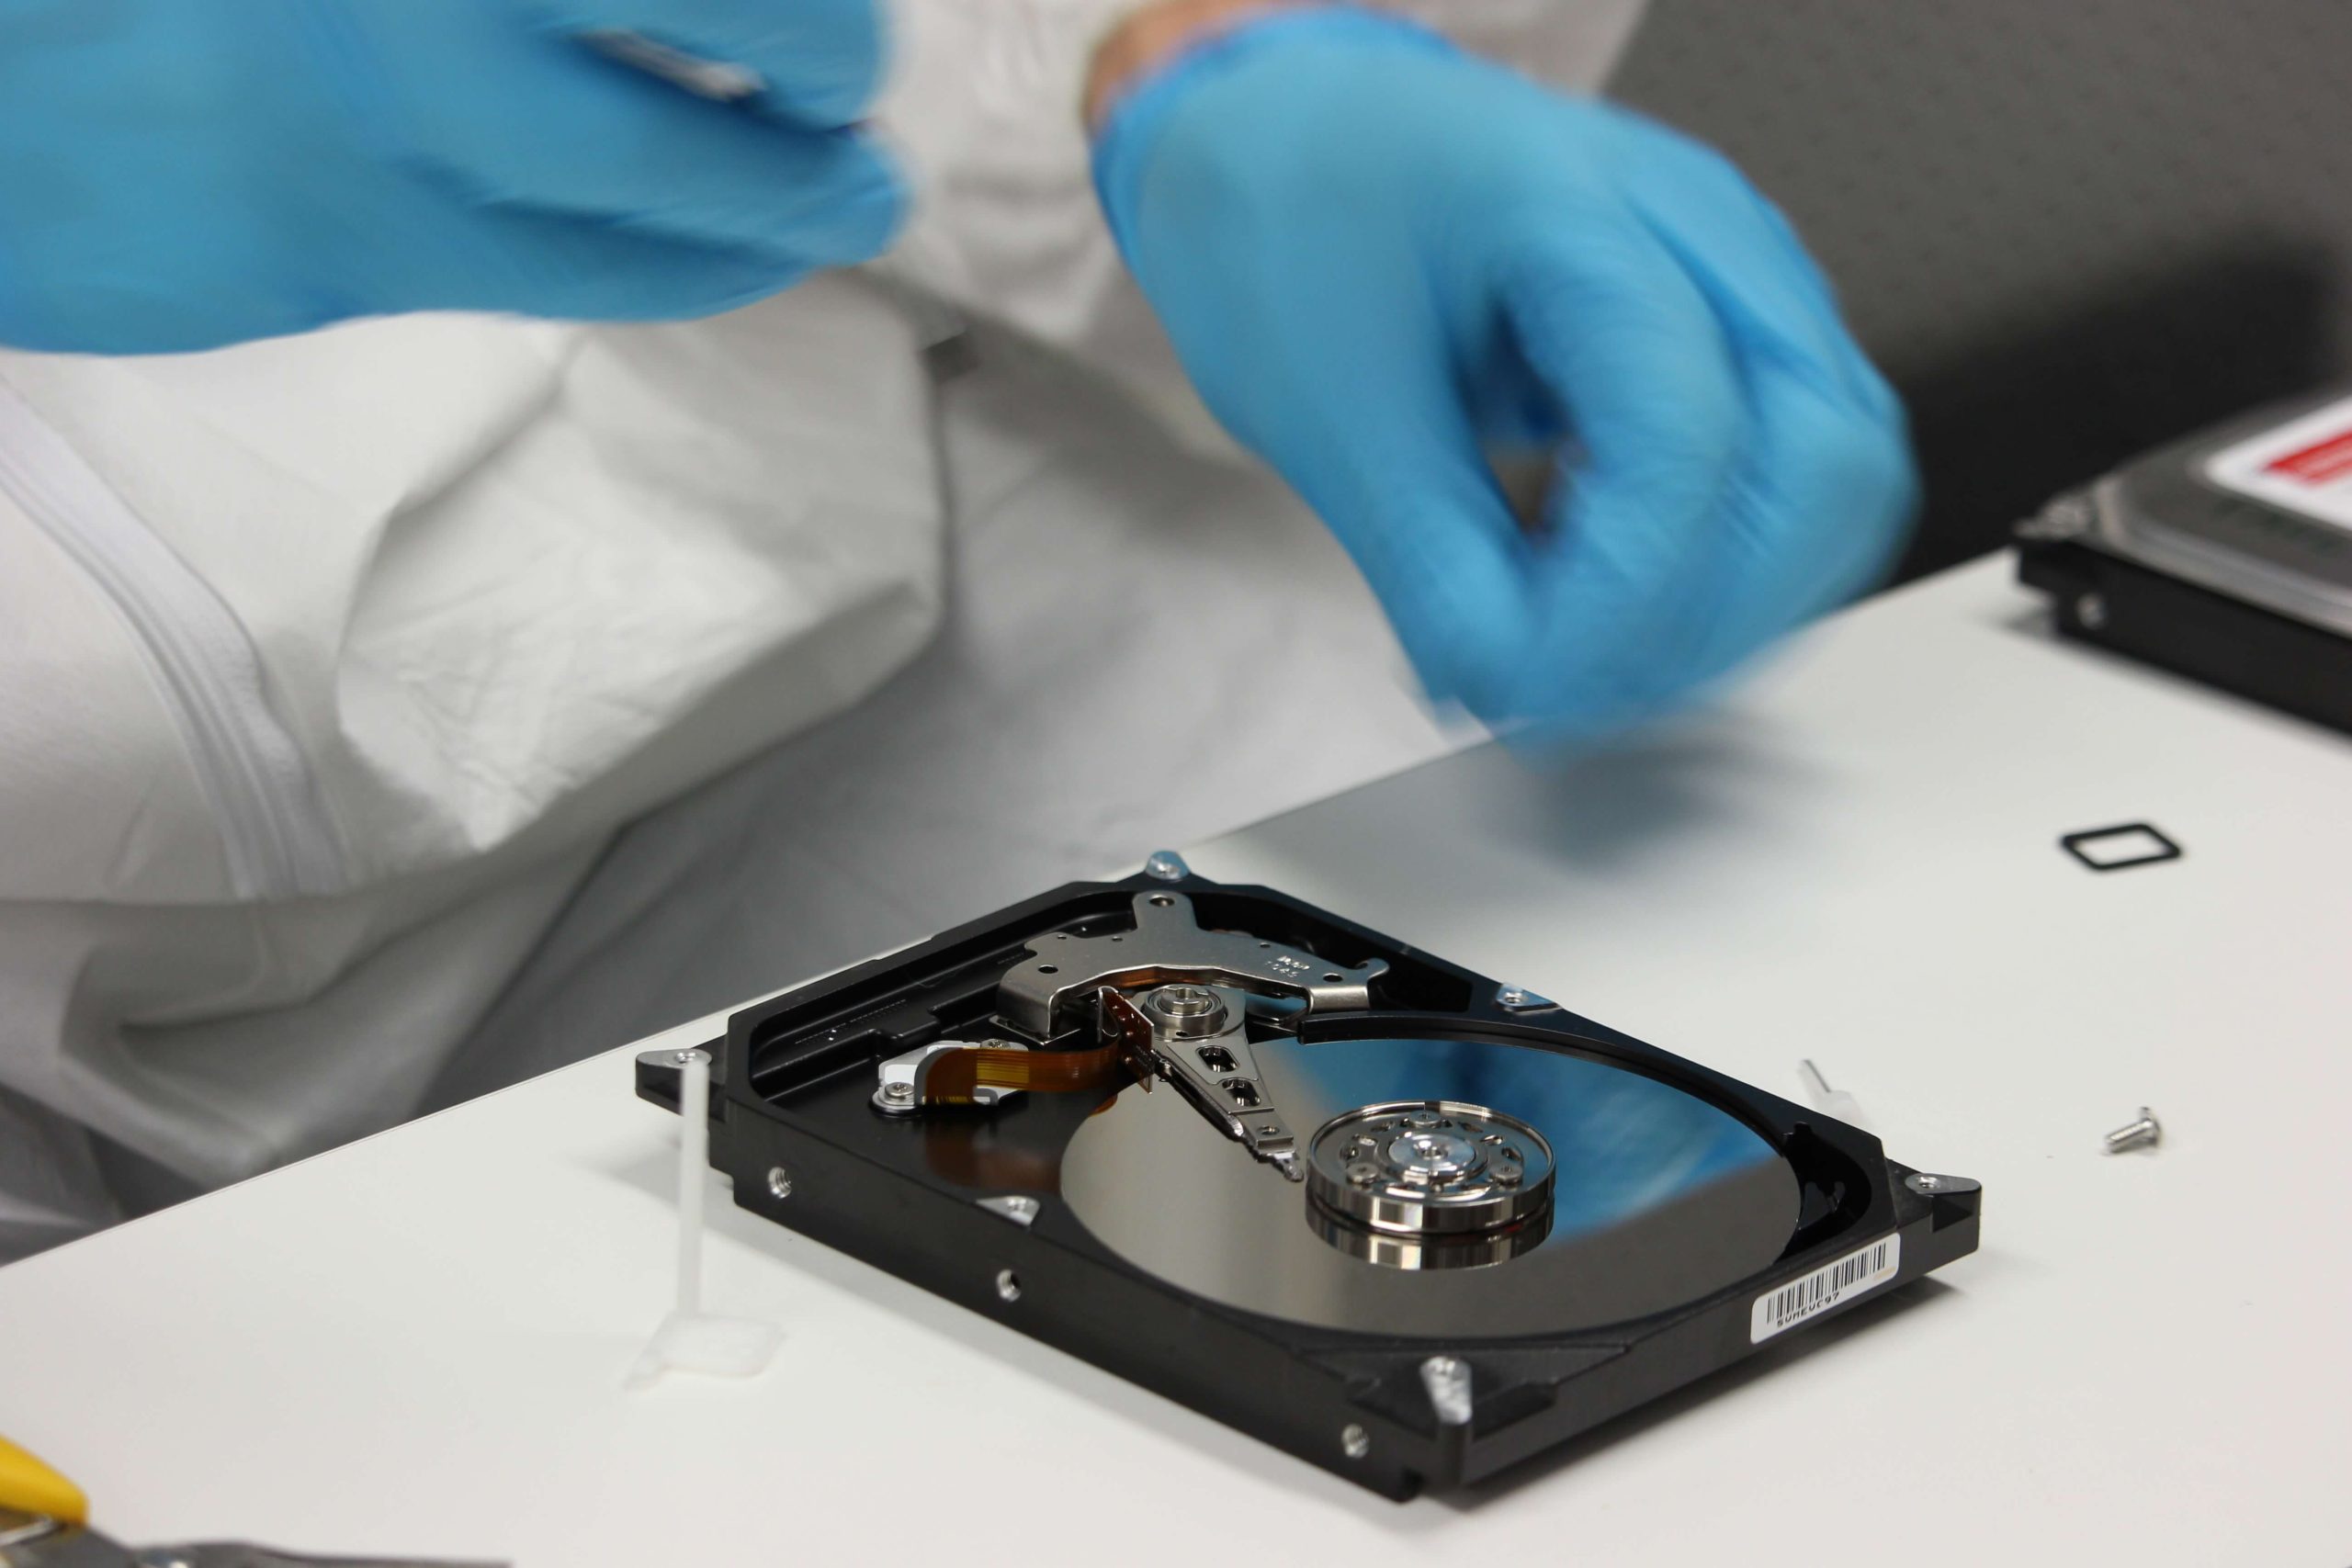 Data Recovery Services From A Maxtor Shared Storage